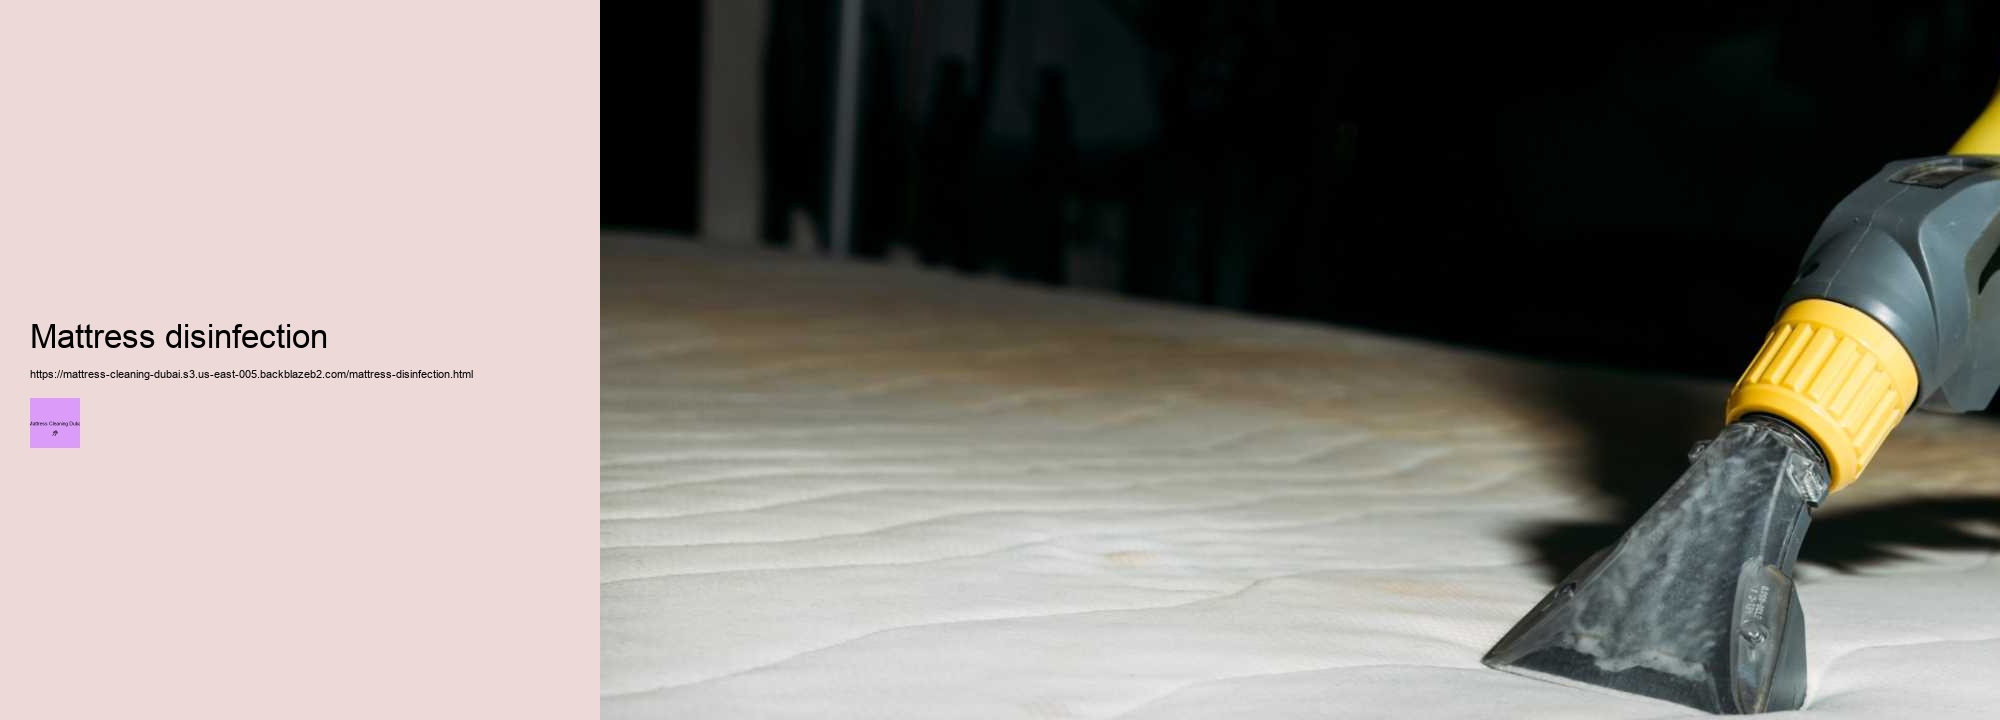 A Comprehensive Guide to Mattress Cleaning Services in Dubai